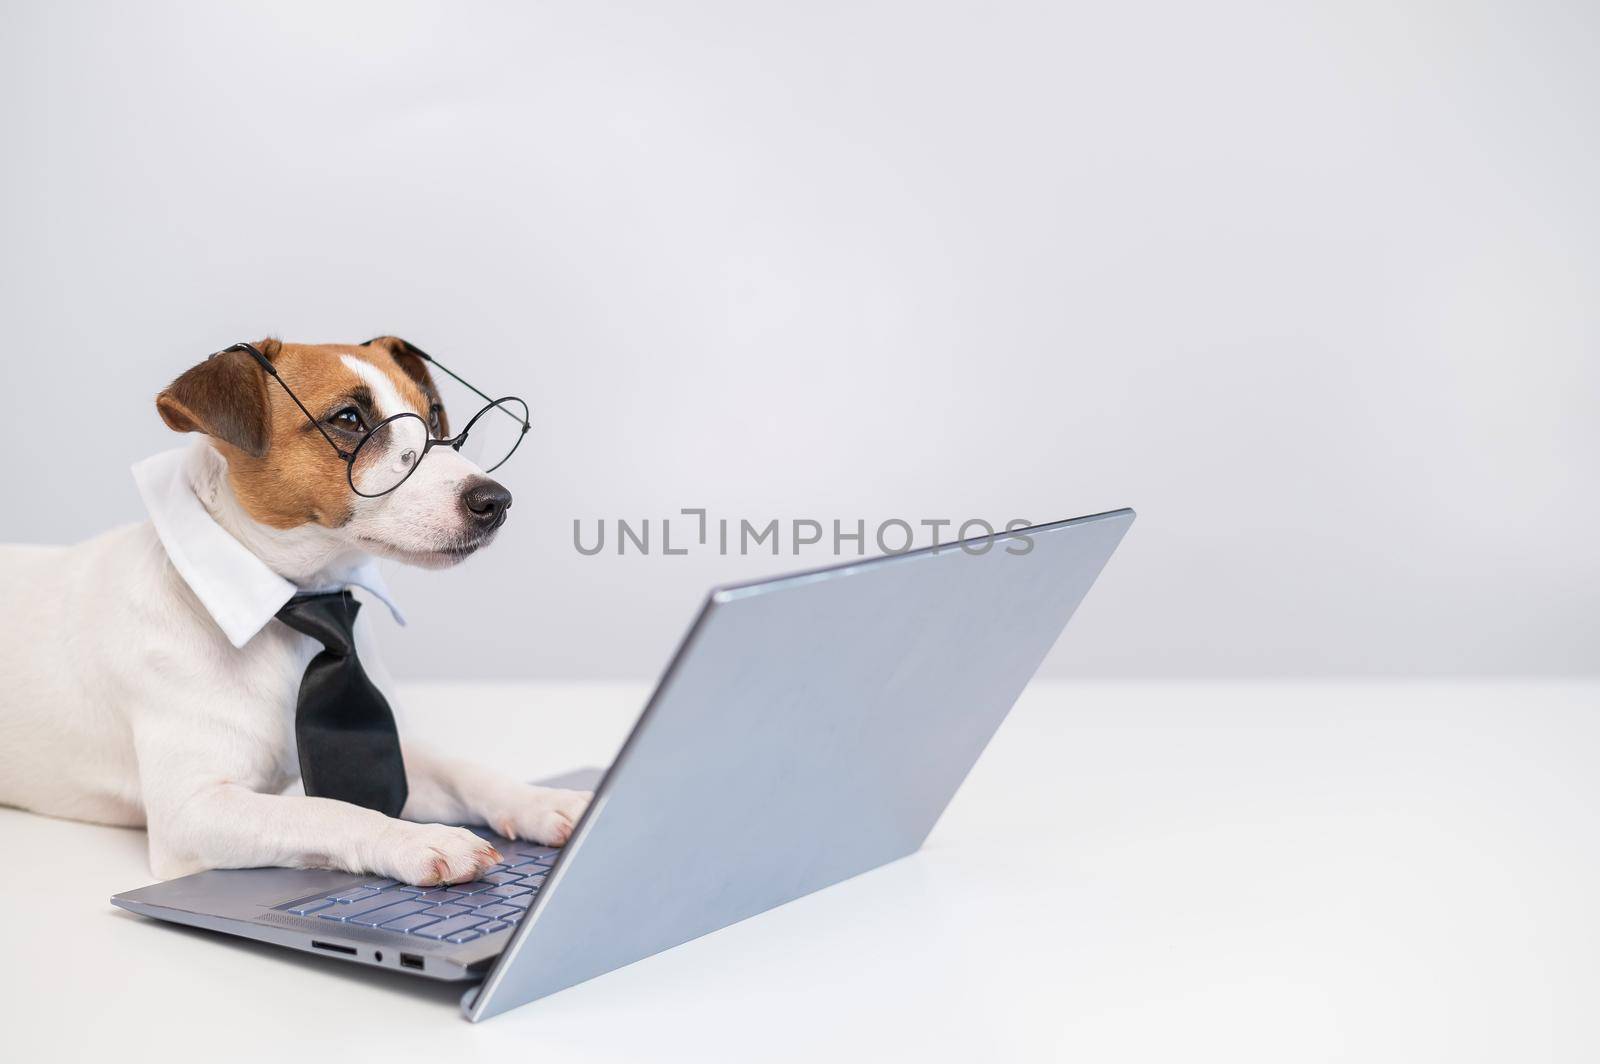 Smart dog jack russell terrier in a tie and glasses sits at a laptop on a white background. by mrwed54